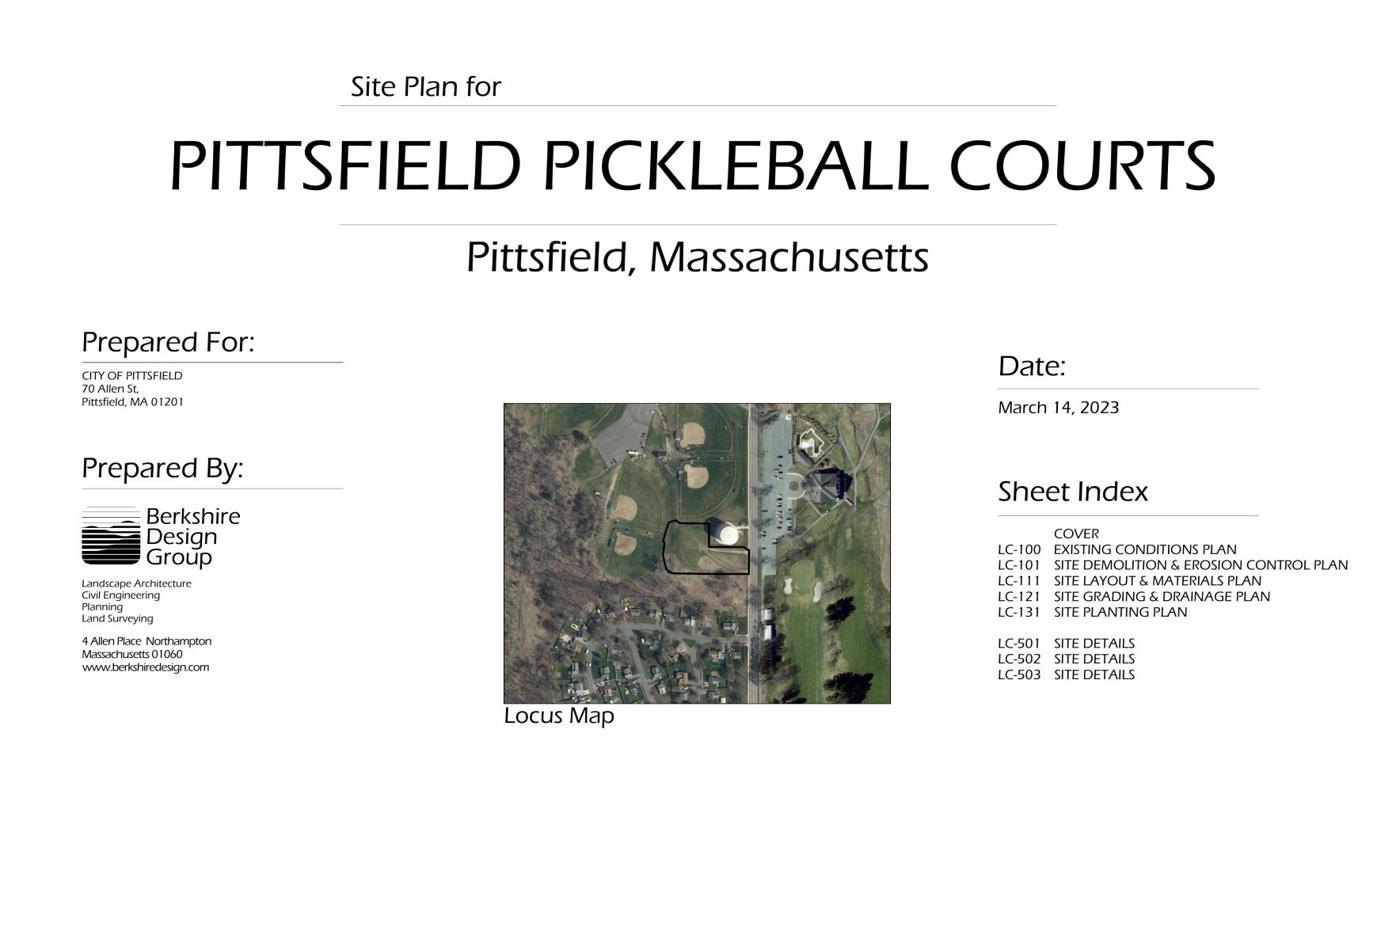 Site plan for Pittsfield pickleball courts